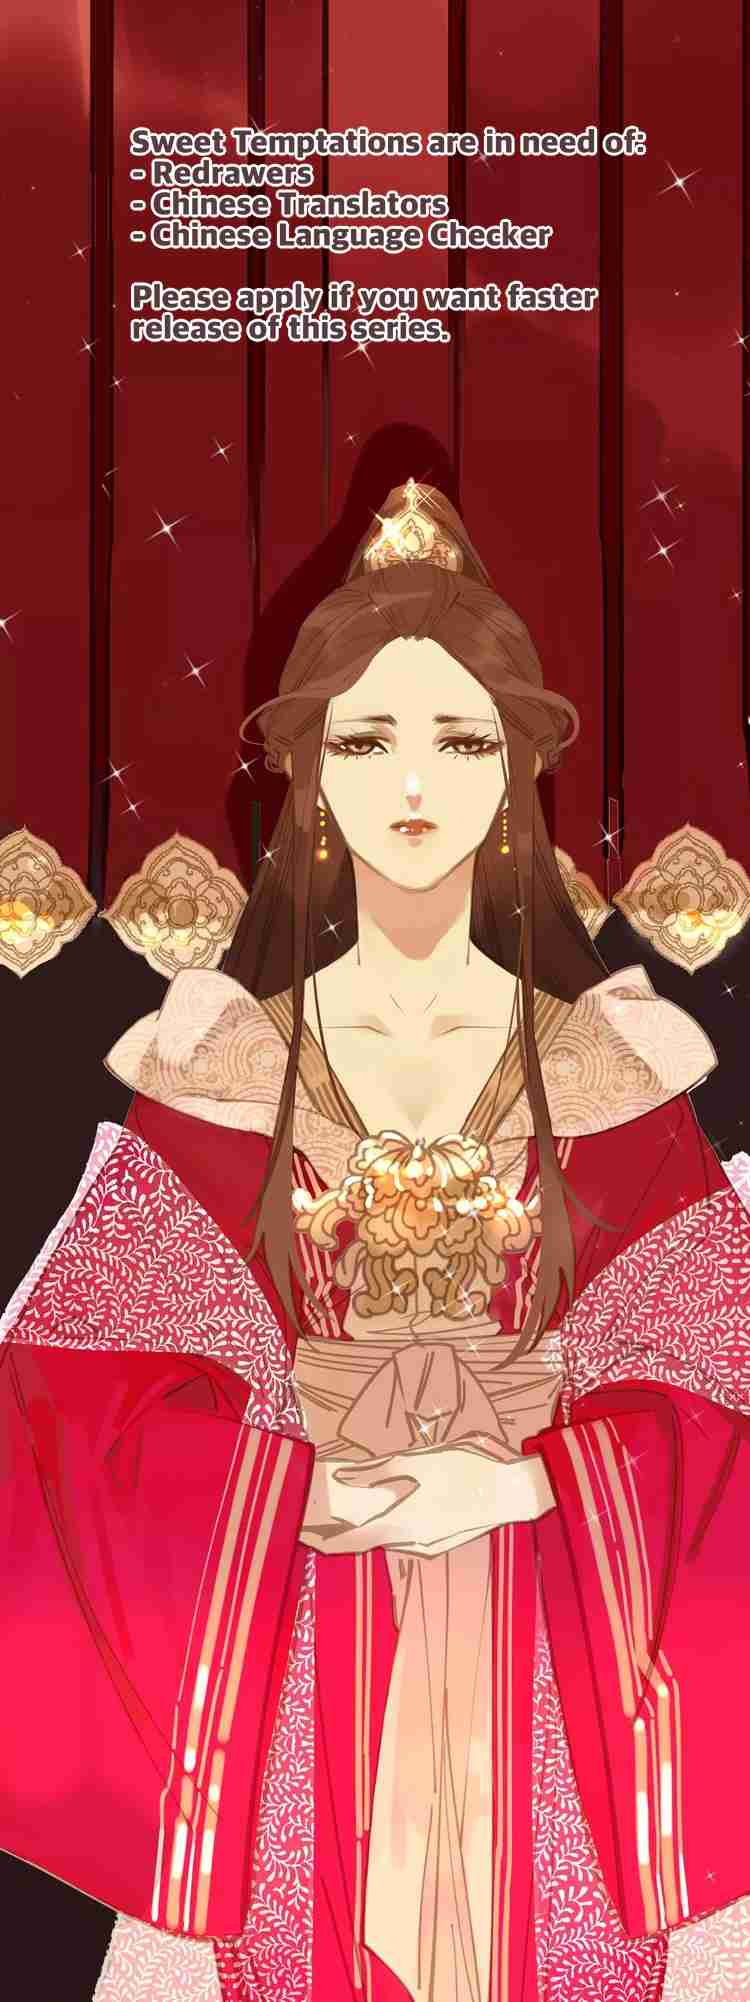 Generation's Queen Ling Ch. 2 The First Night of Service (First Wedding Night)